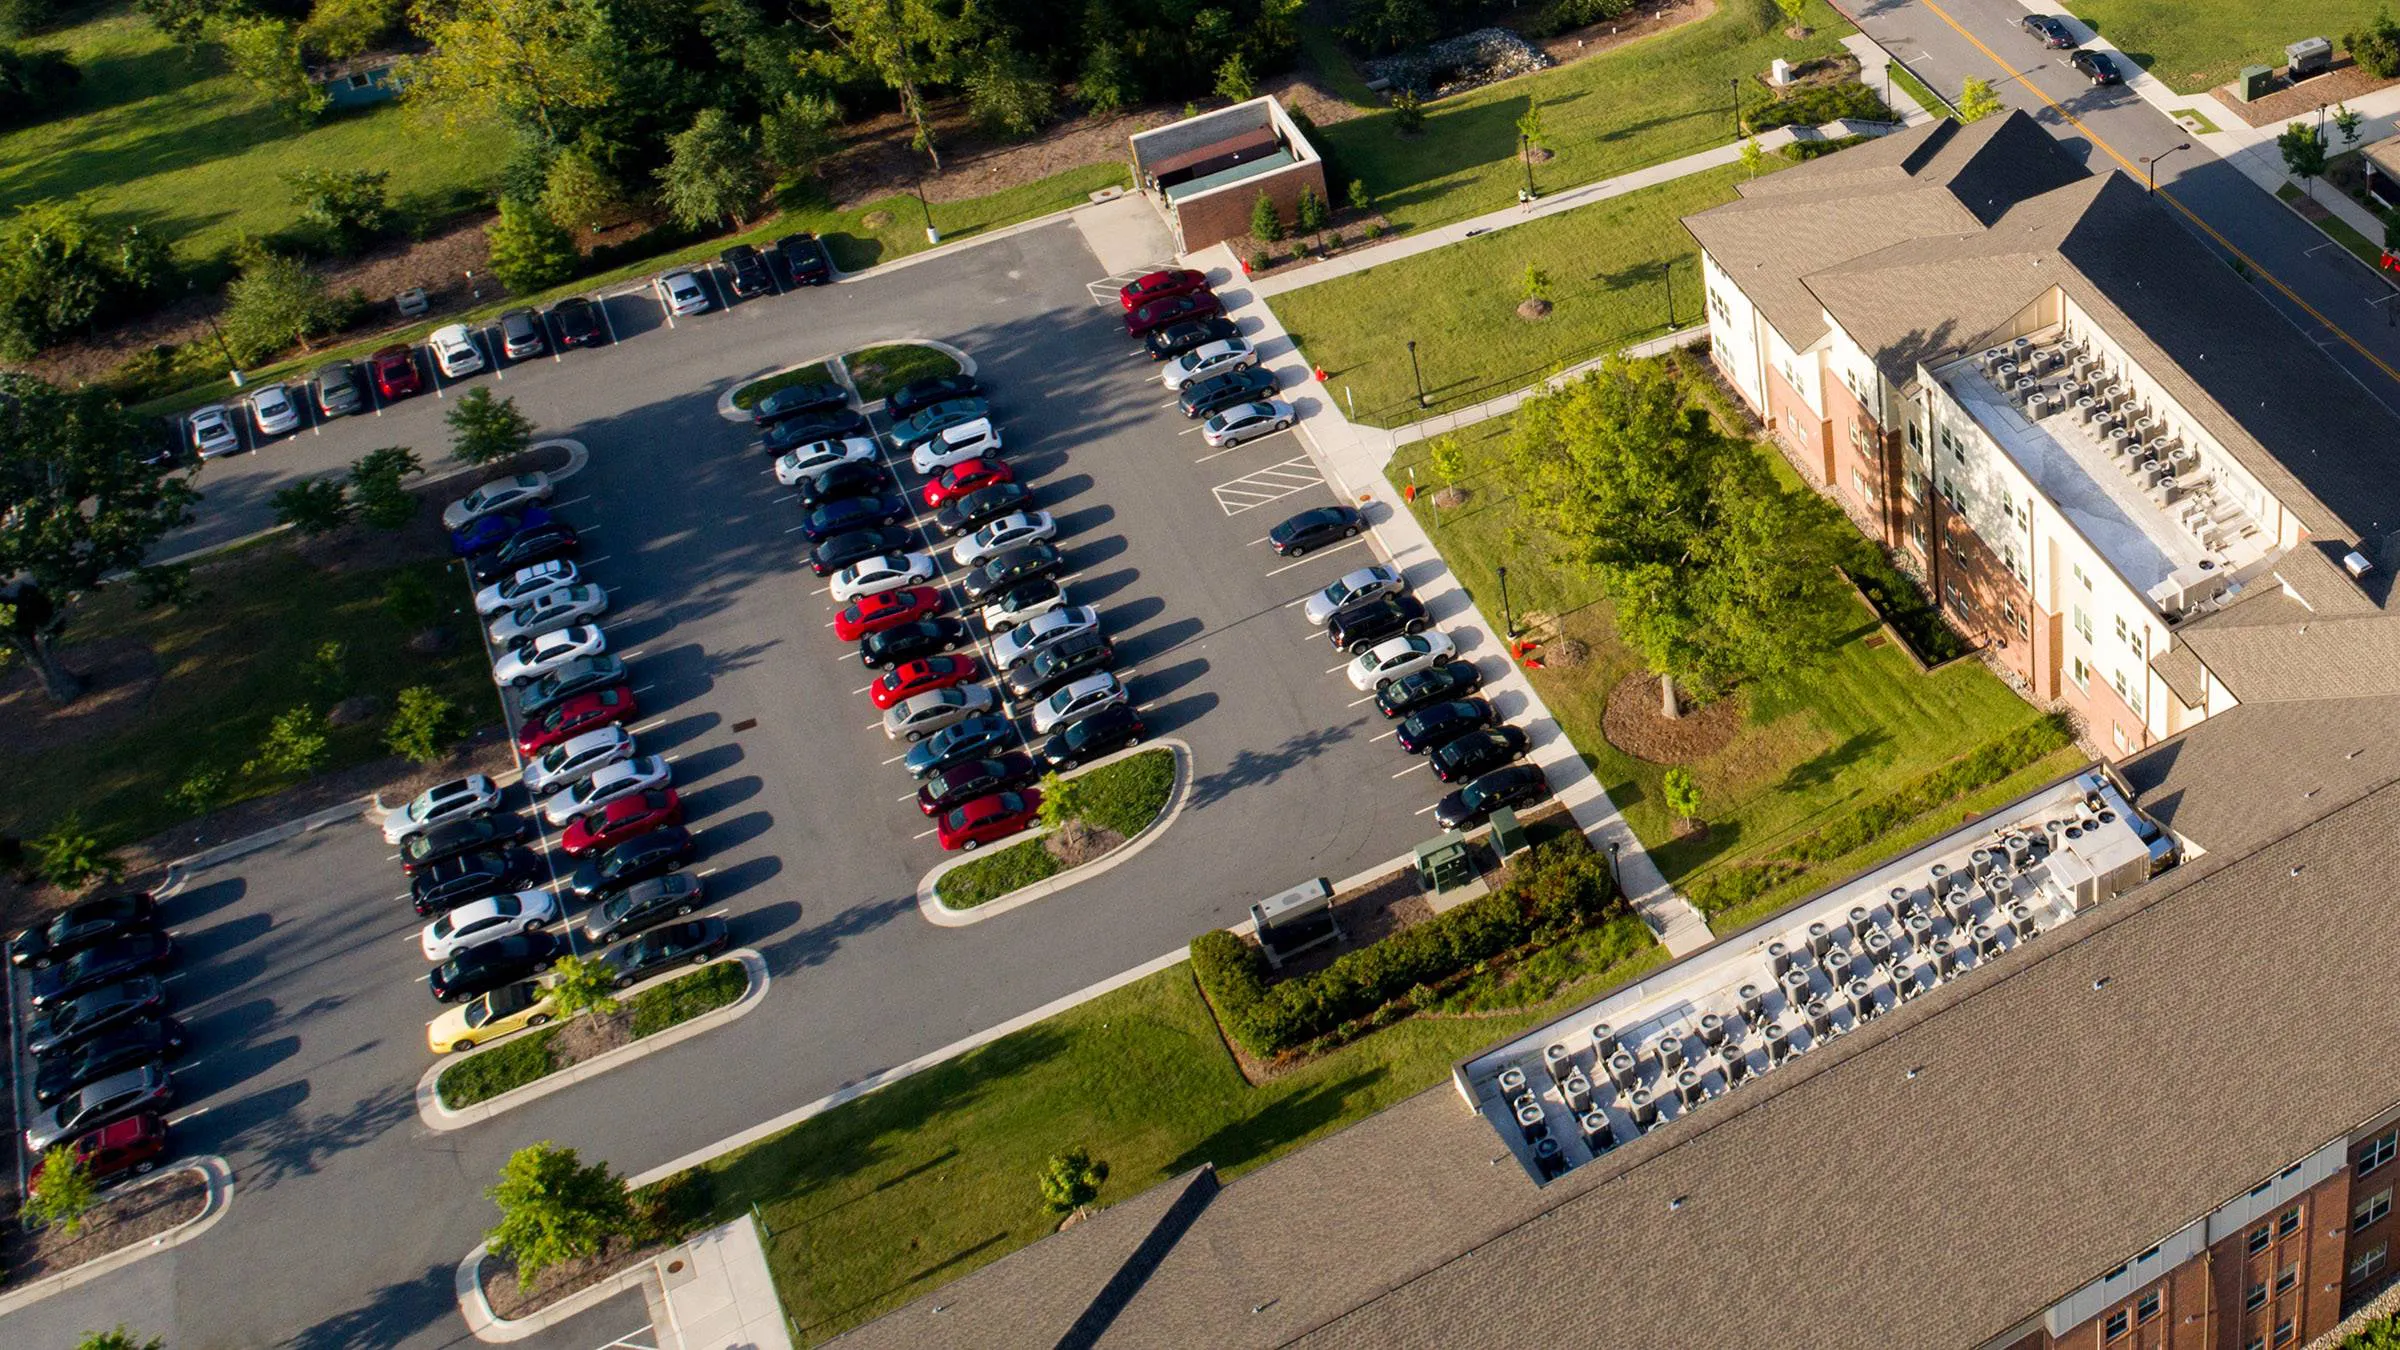 Aerial view of the Highland Residence Hall parking lot.